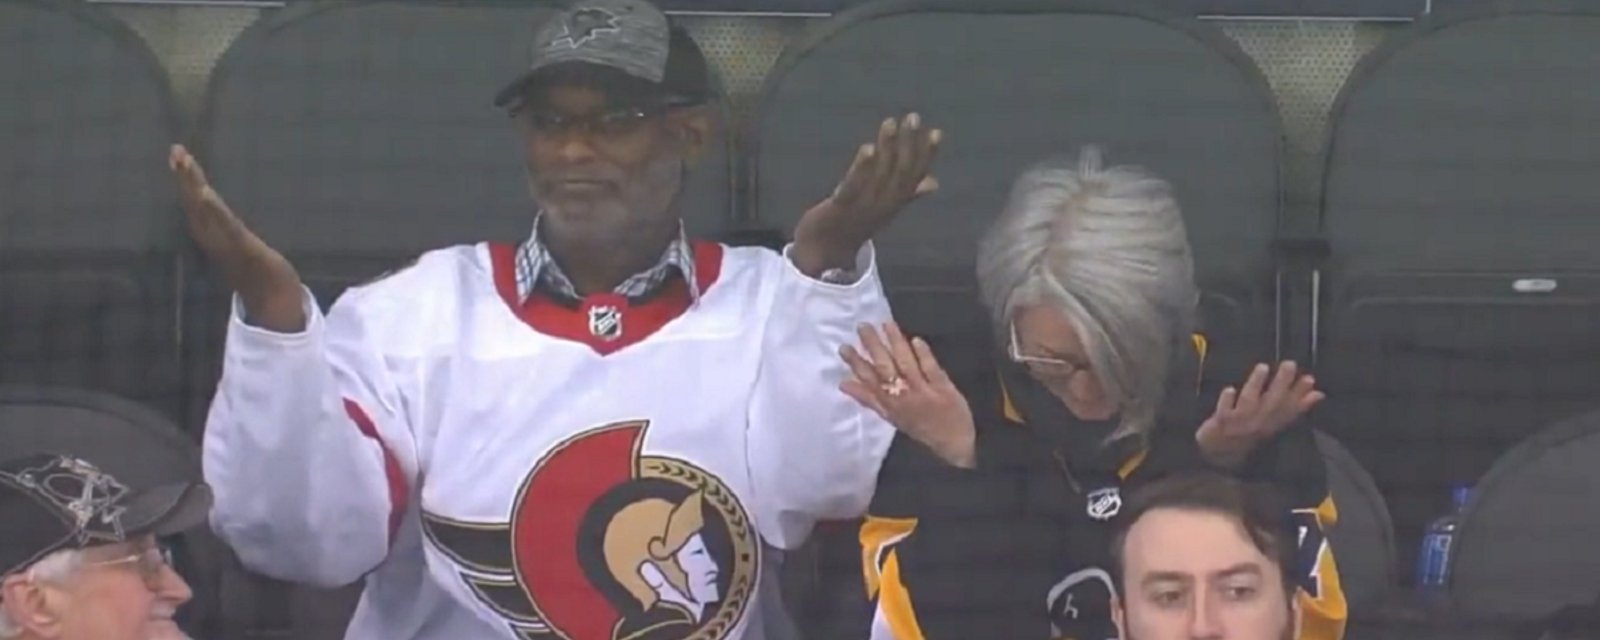 Mom and Dad crack up after both their sons get hauled off with matching penalties.